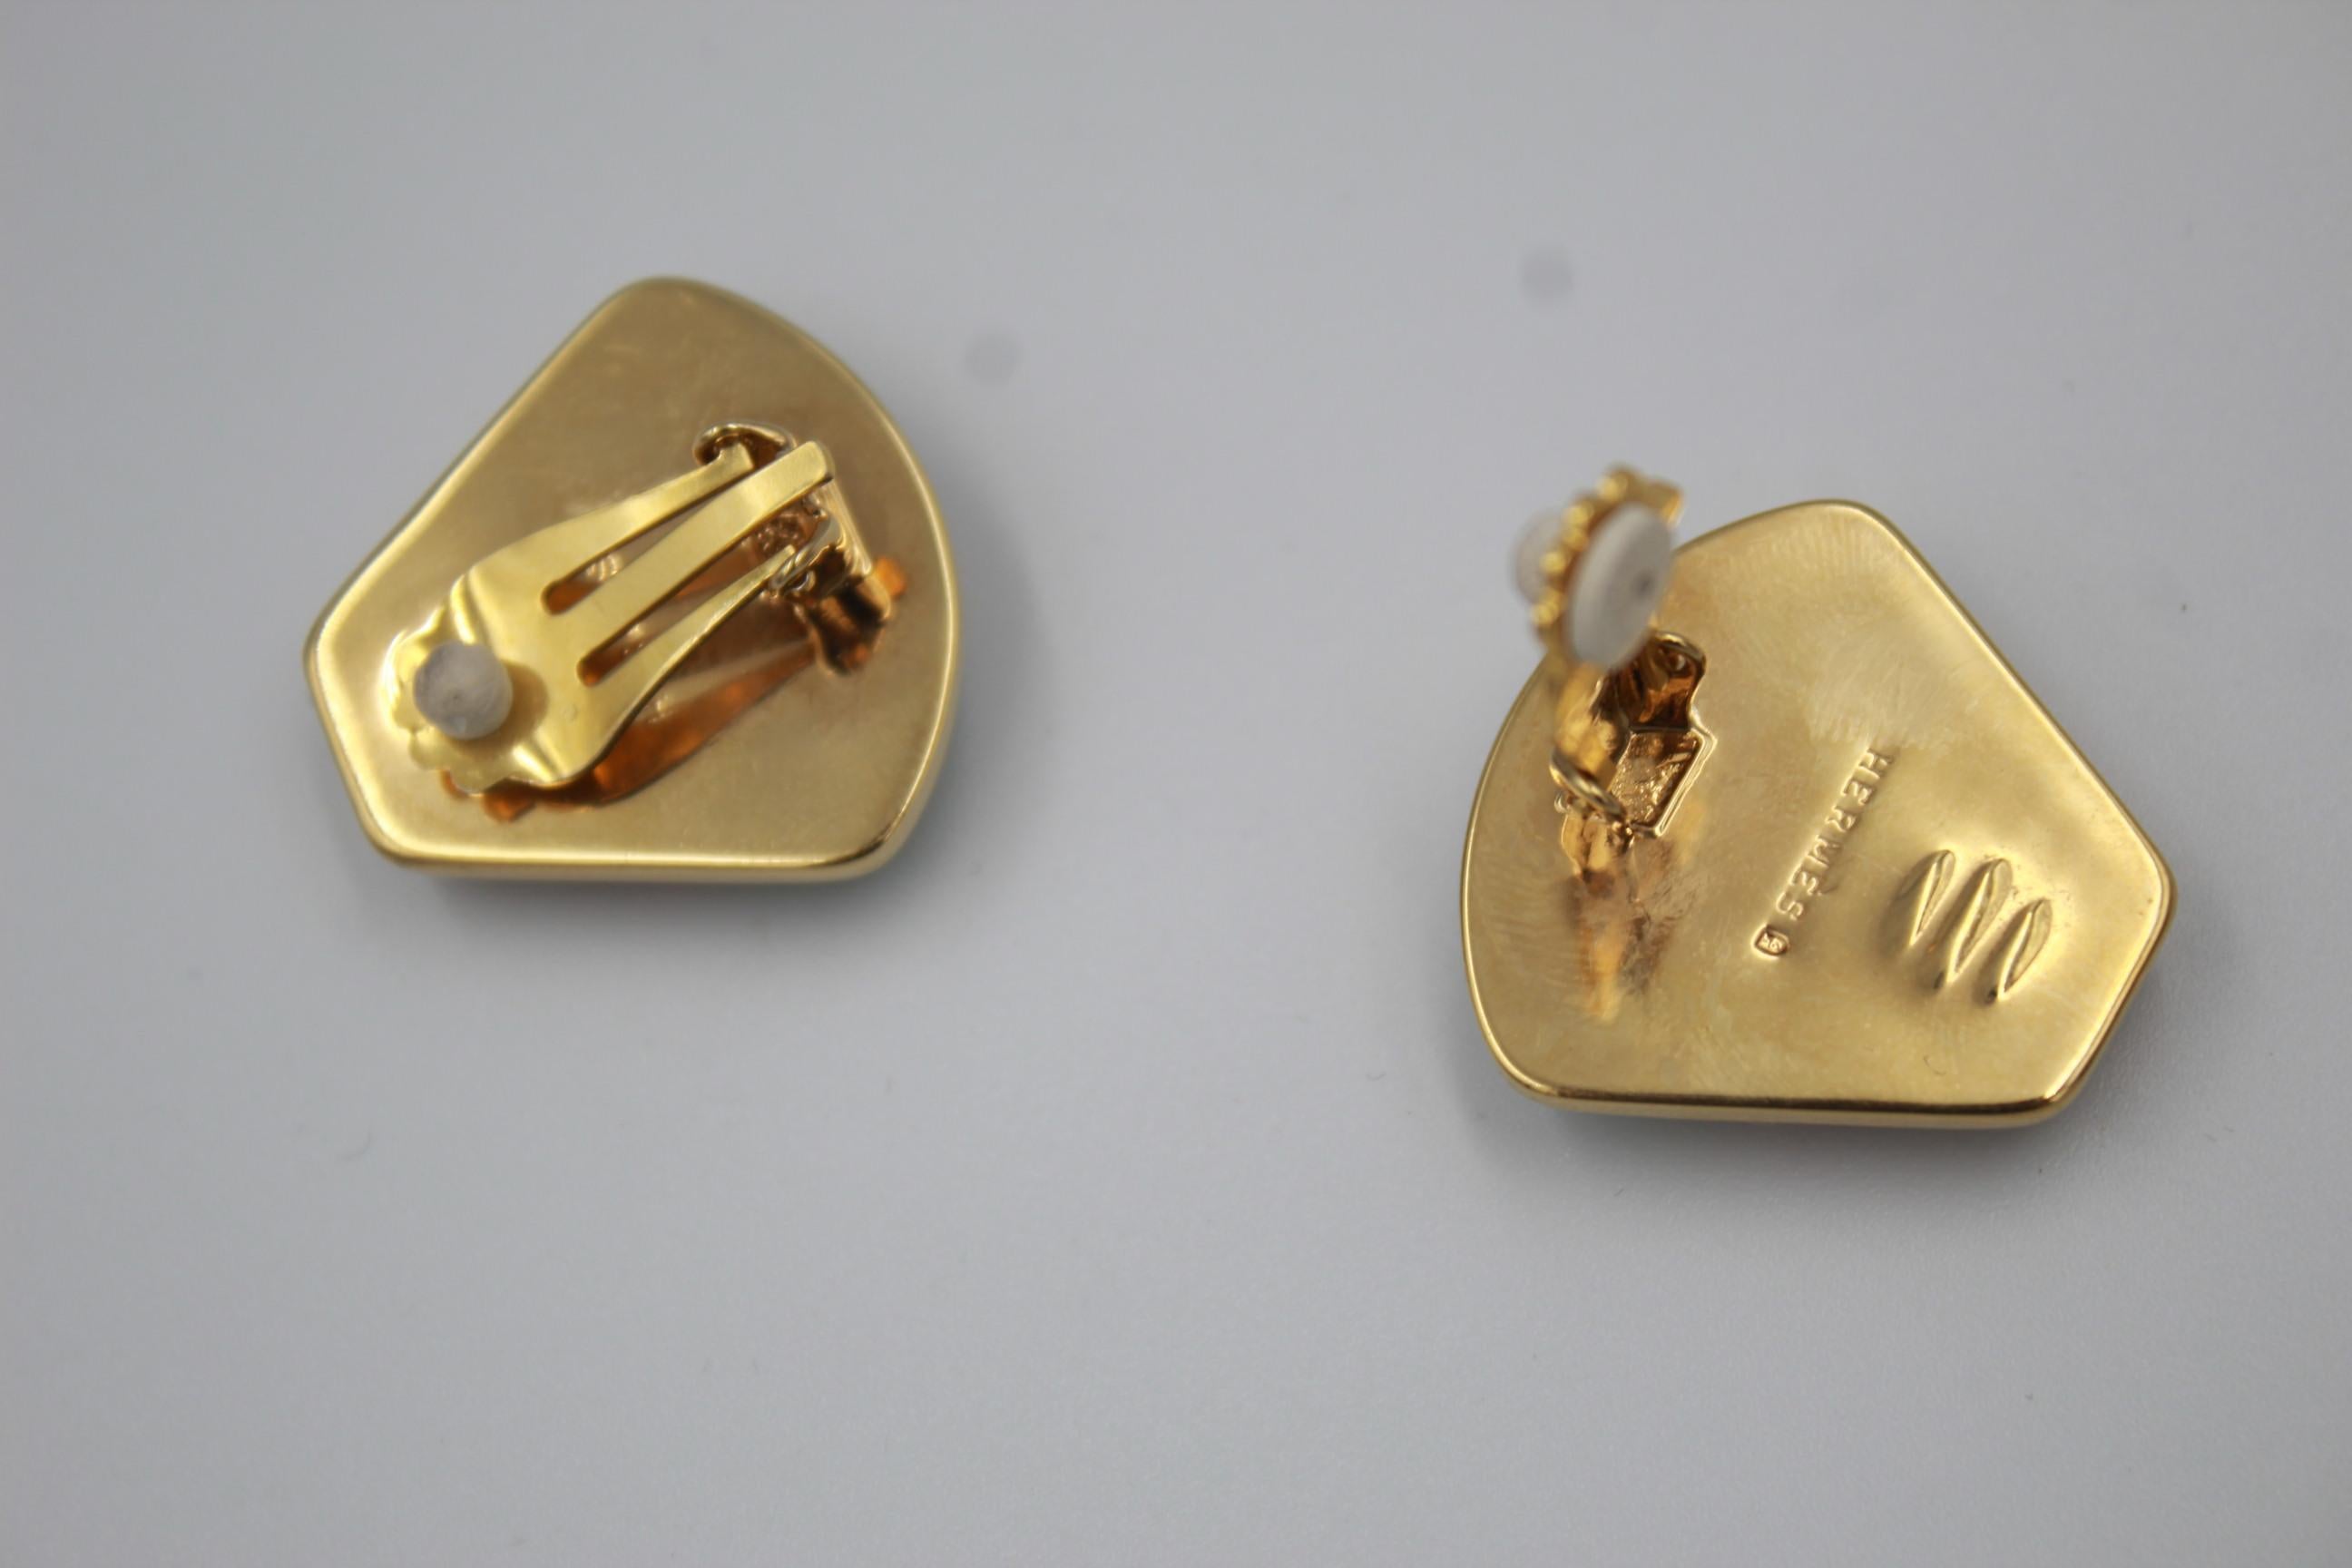 Nice pair of Hermes vintage Earrings in gold plated metal and emanel.
Clip system